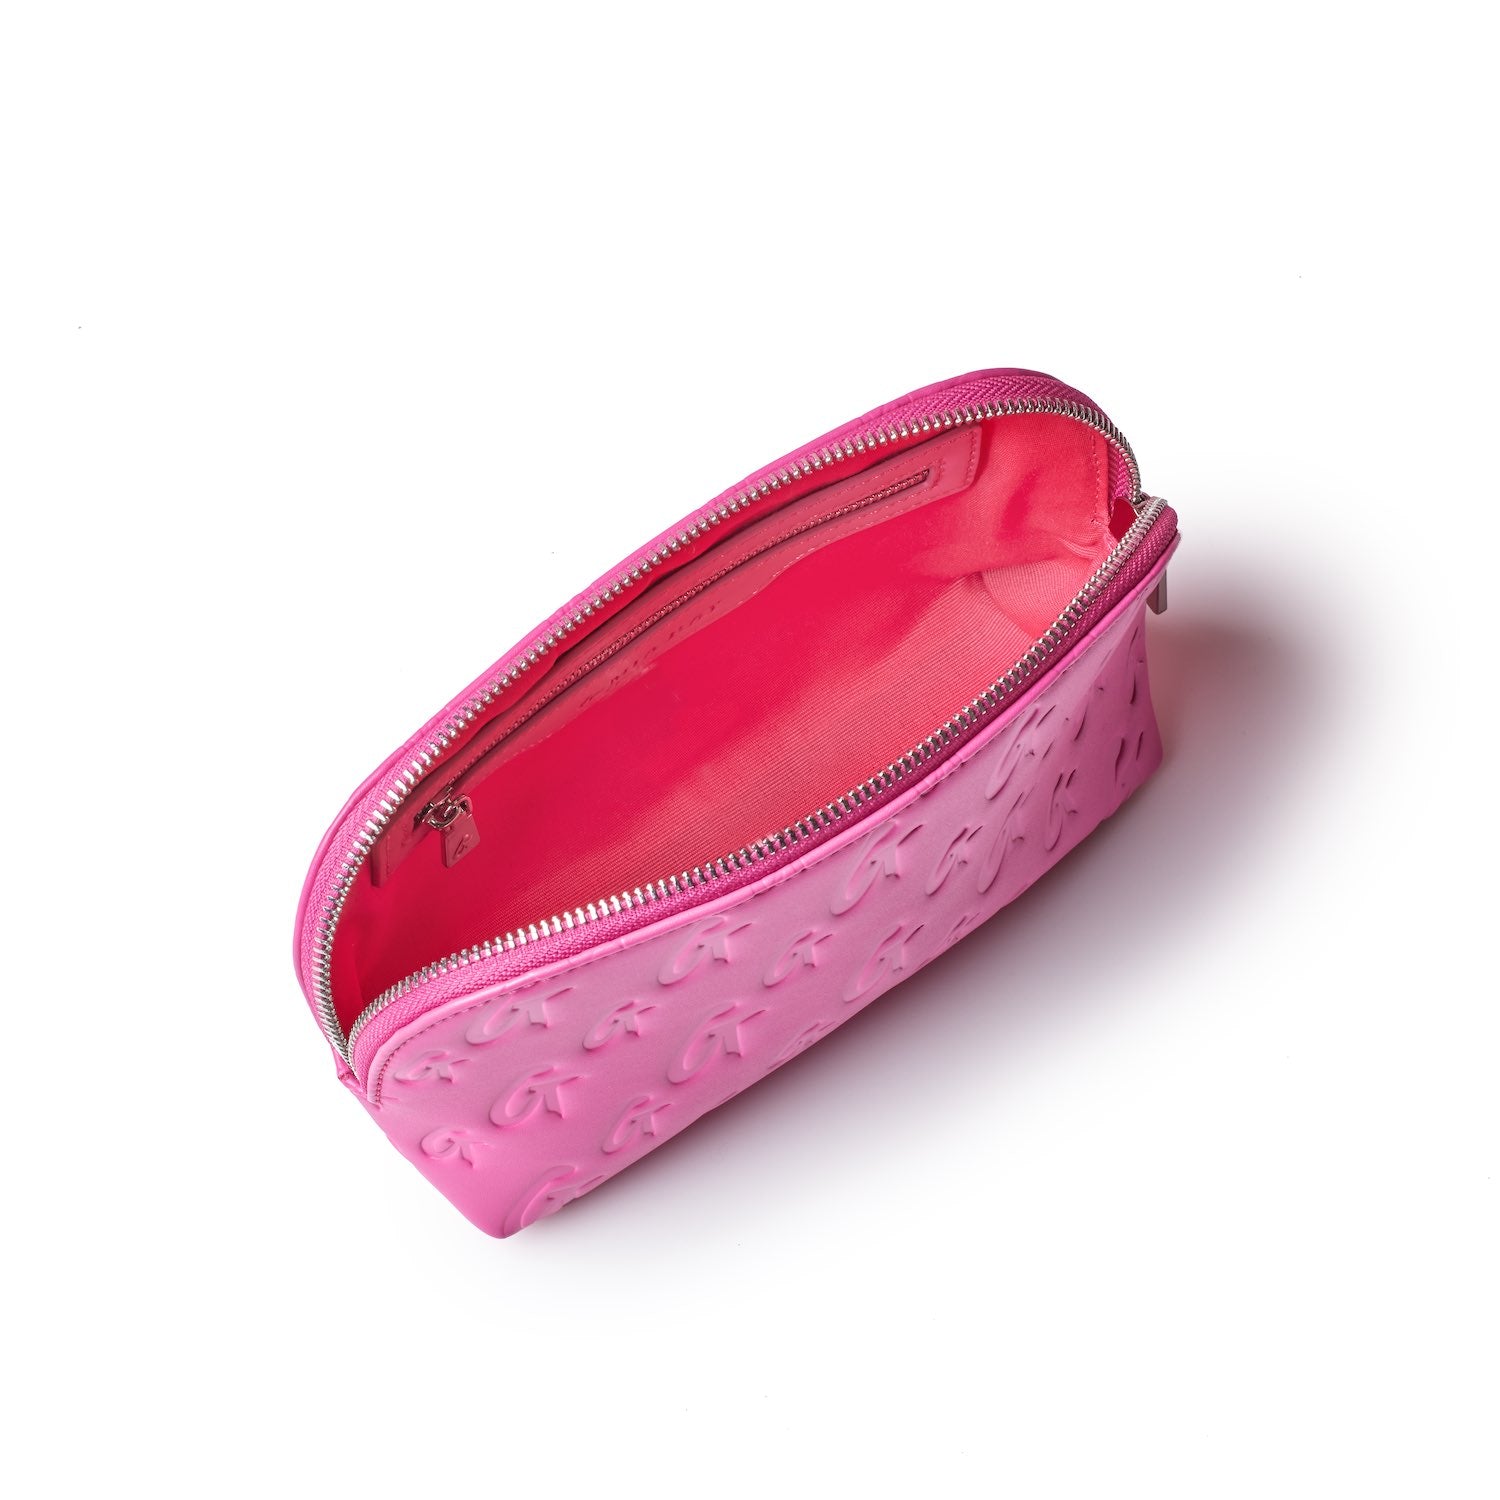 MONOGRAM COSMETIC POUCH HOT PINK